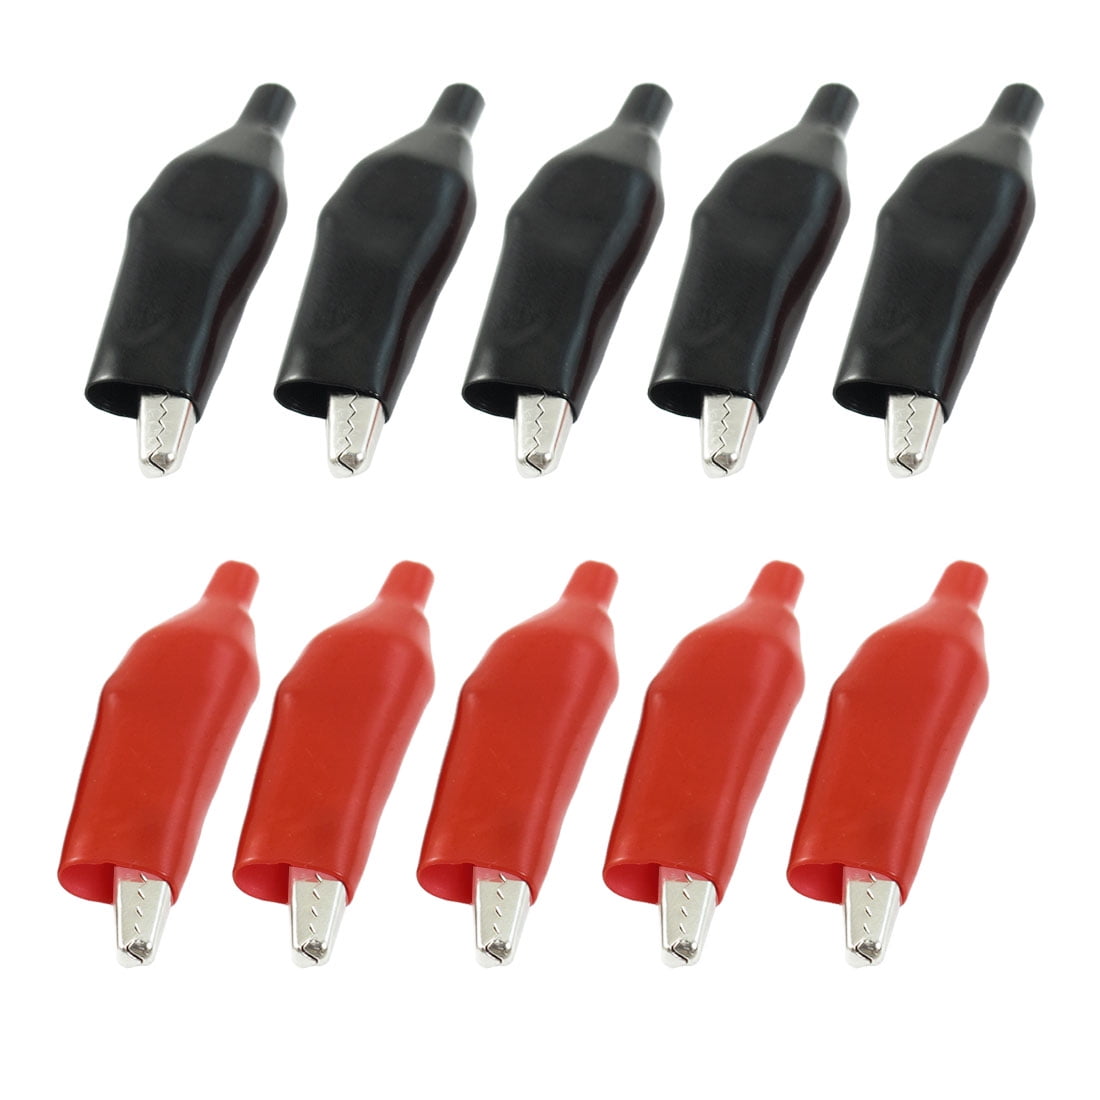 a13022700ux0091 Uxcell Uxcell 55mm Long Red Black Soft Boot Coated Testing Alligator Clip Clamps UXCE9 4 Piece 